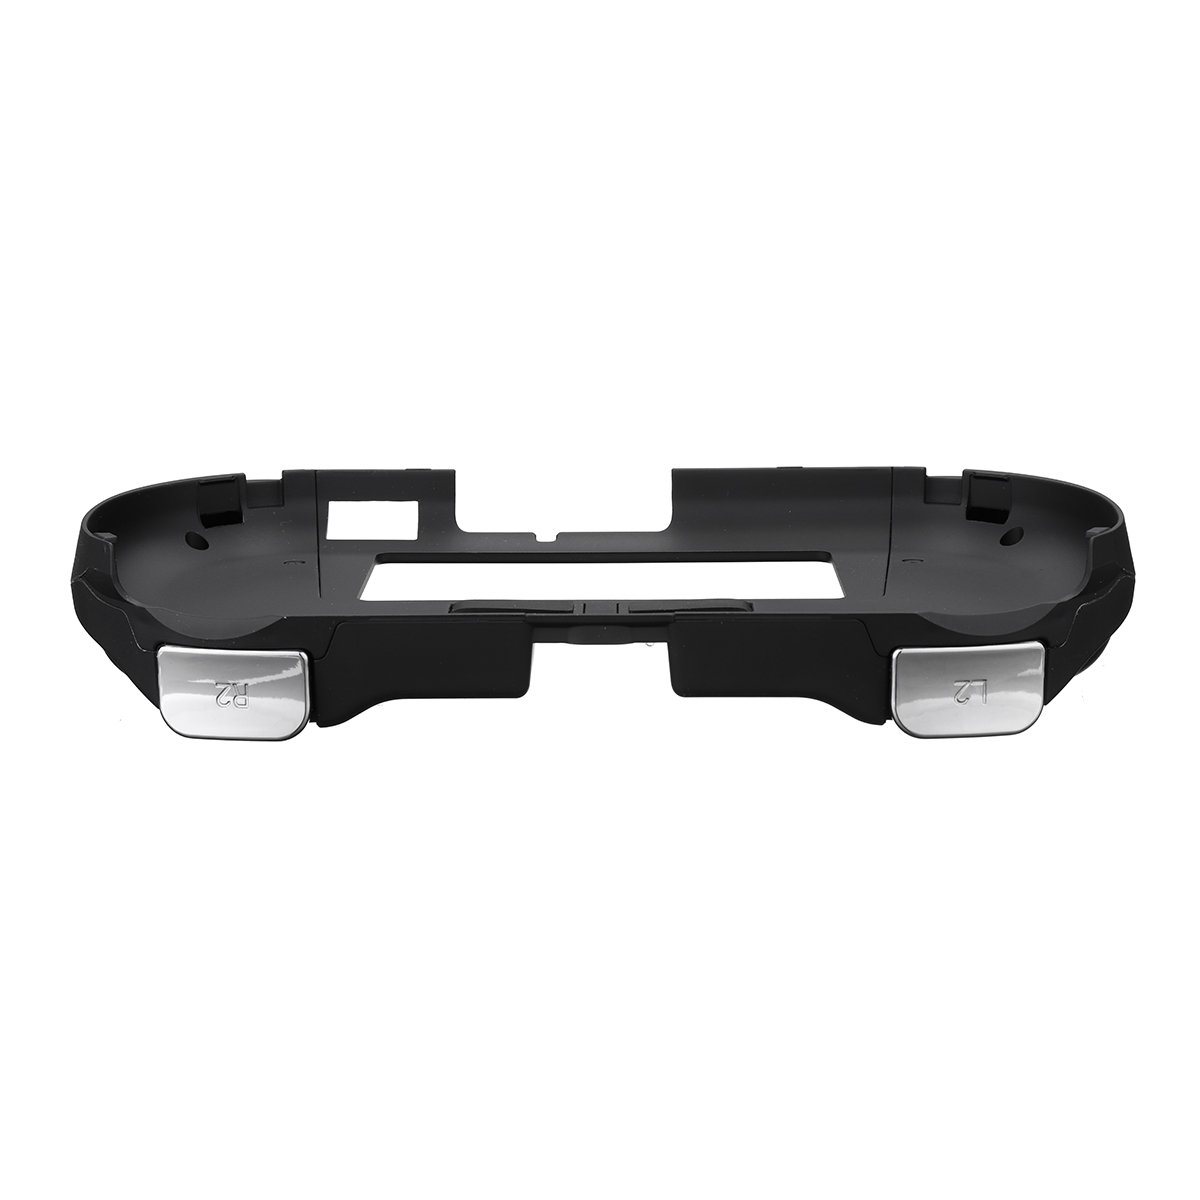 L2 R2 Trigger Grips Handle Shell Protective Case for Sony PlayStation PS Vita 2000 Game Console 14